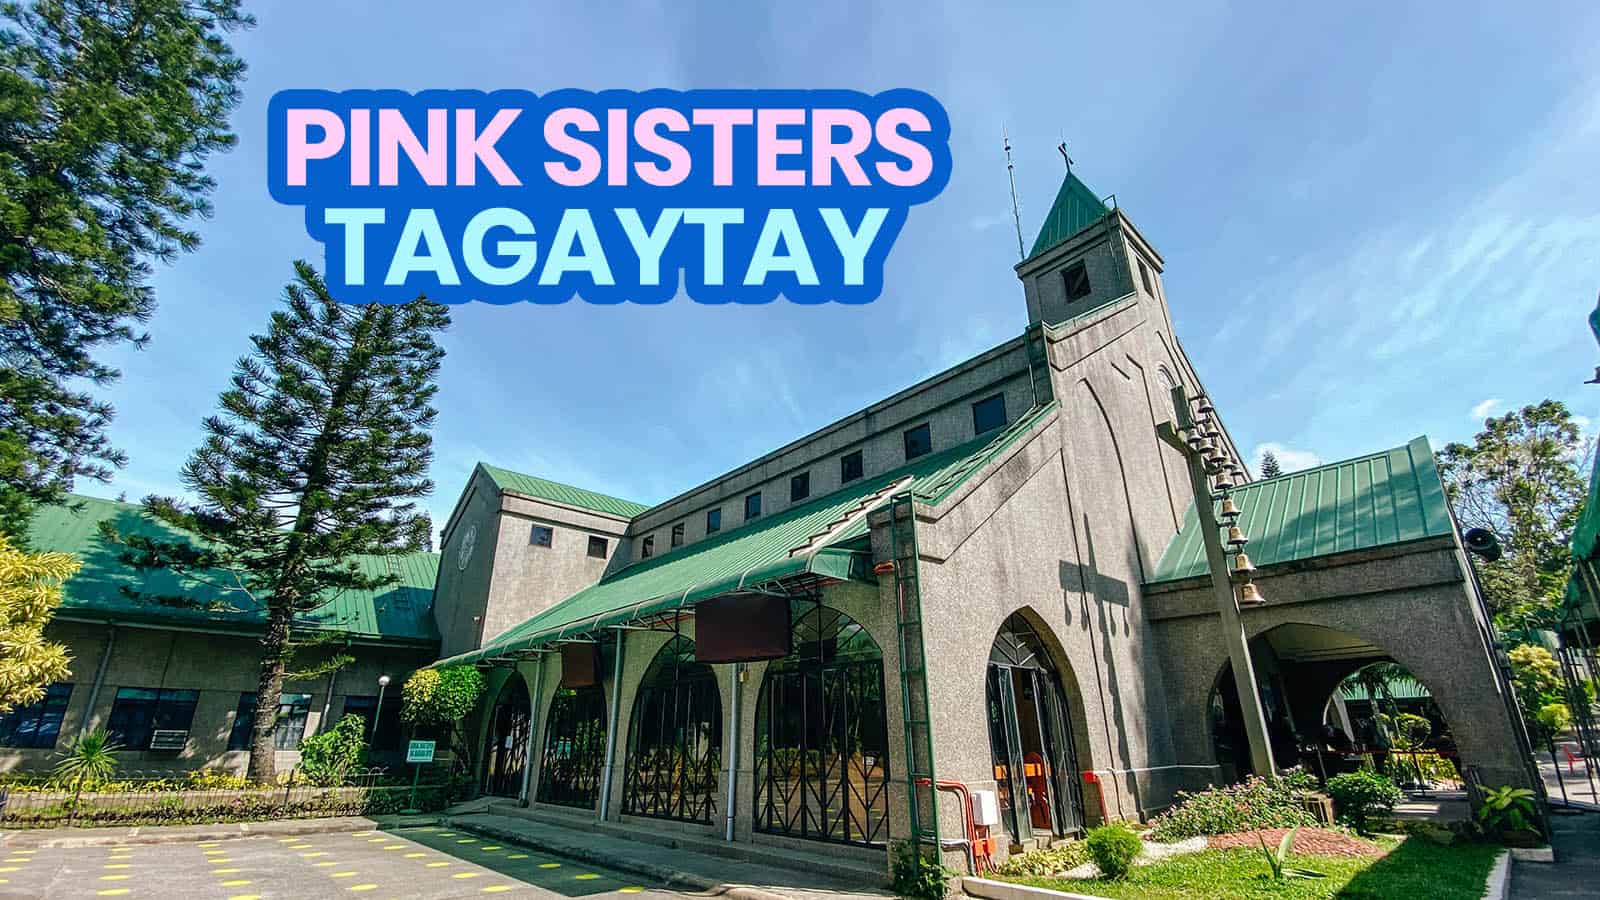 PINK SISTERS TAGAYTAY: Travel Guide, Mass Schedule, How to Get There